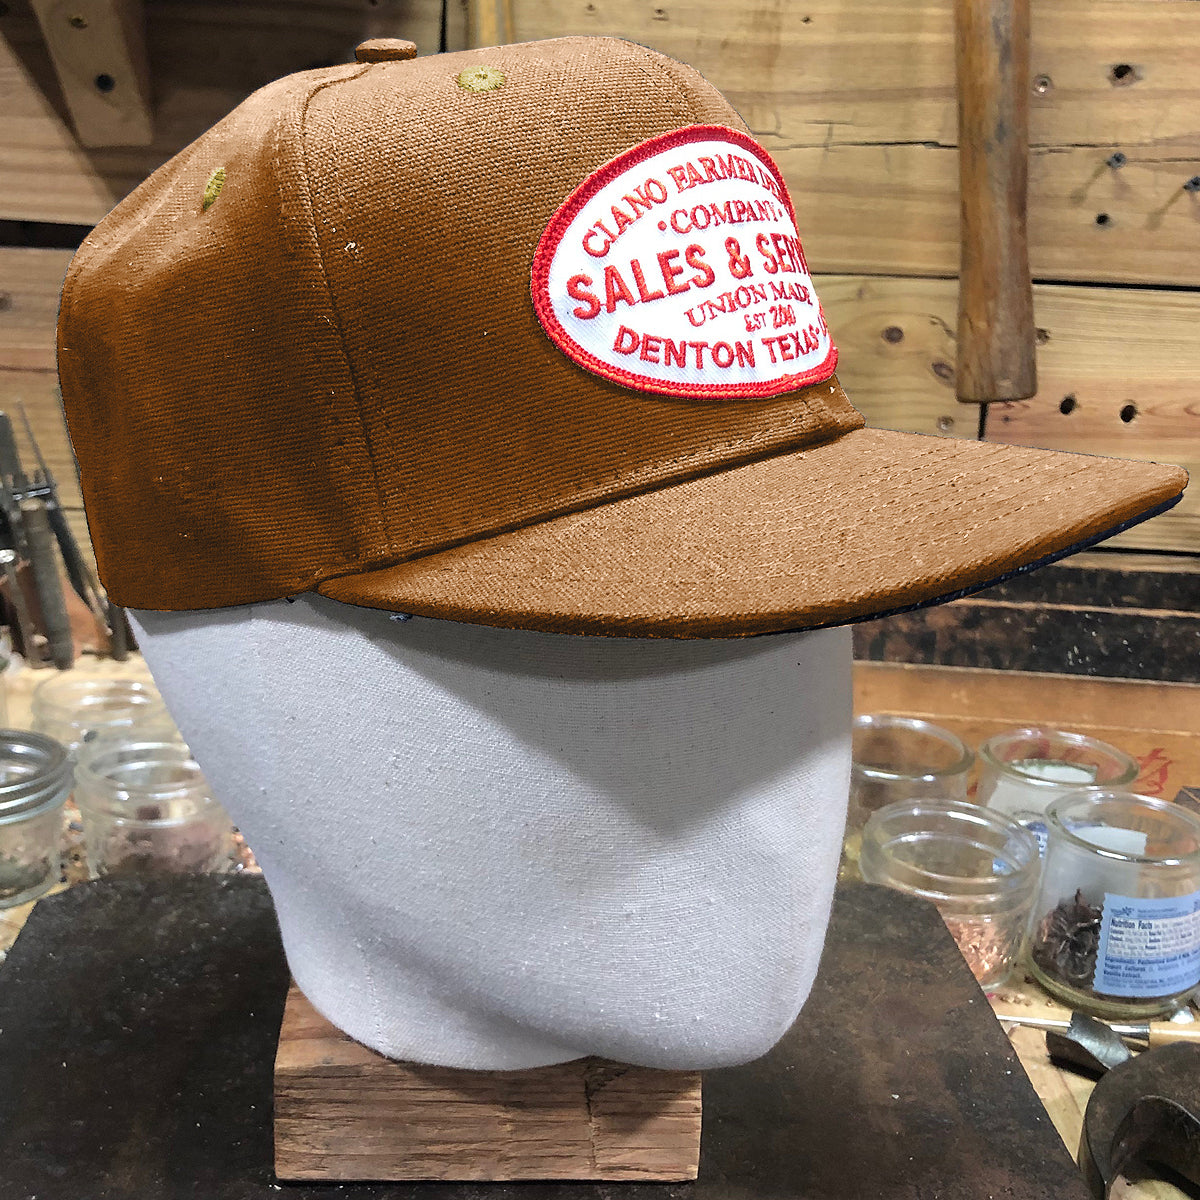 18oz USA Duck Canvas Snapback HAT "OCHRE" Sales and Service Patch